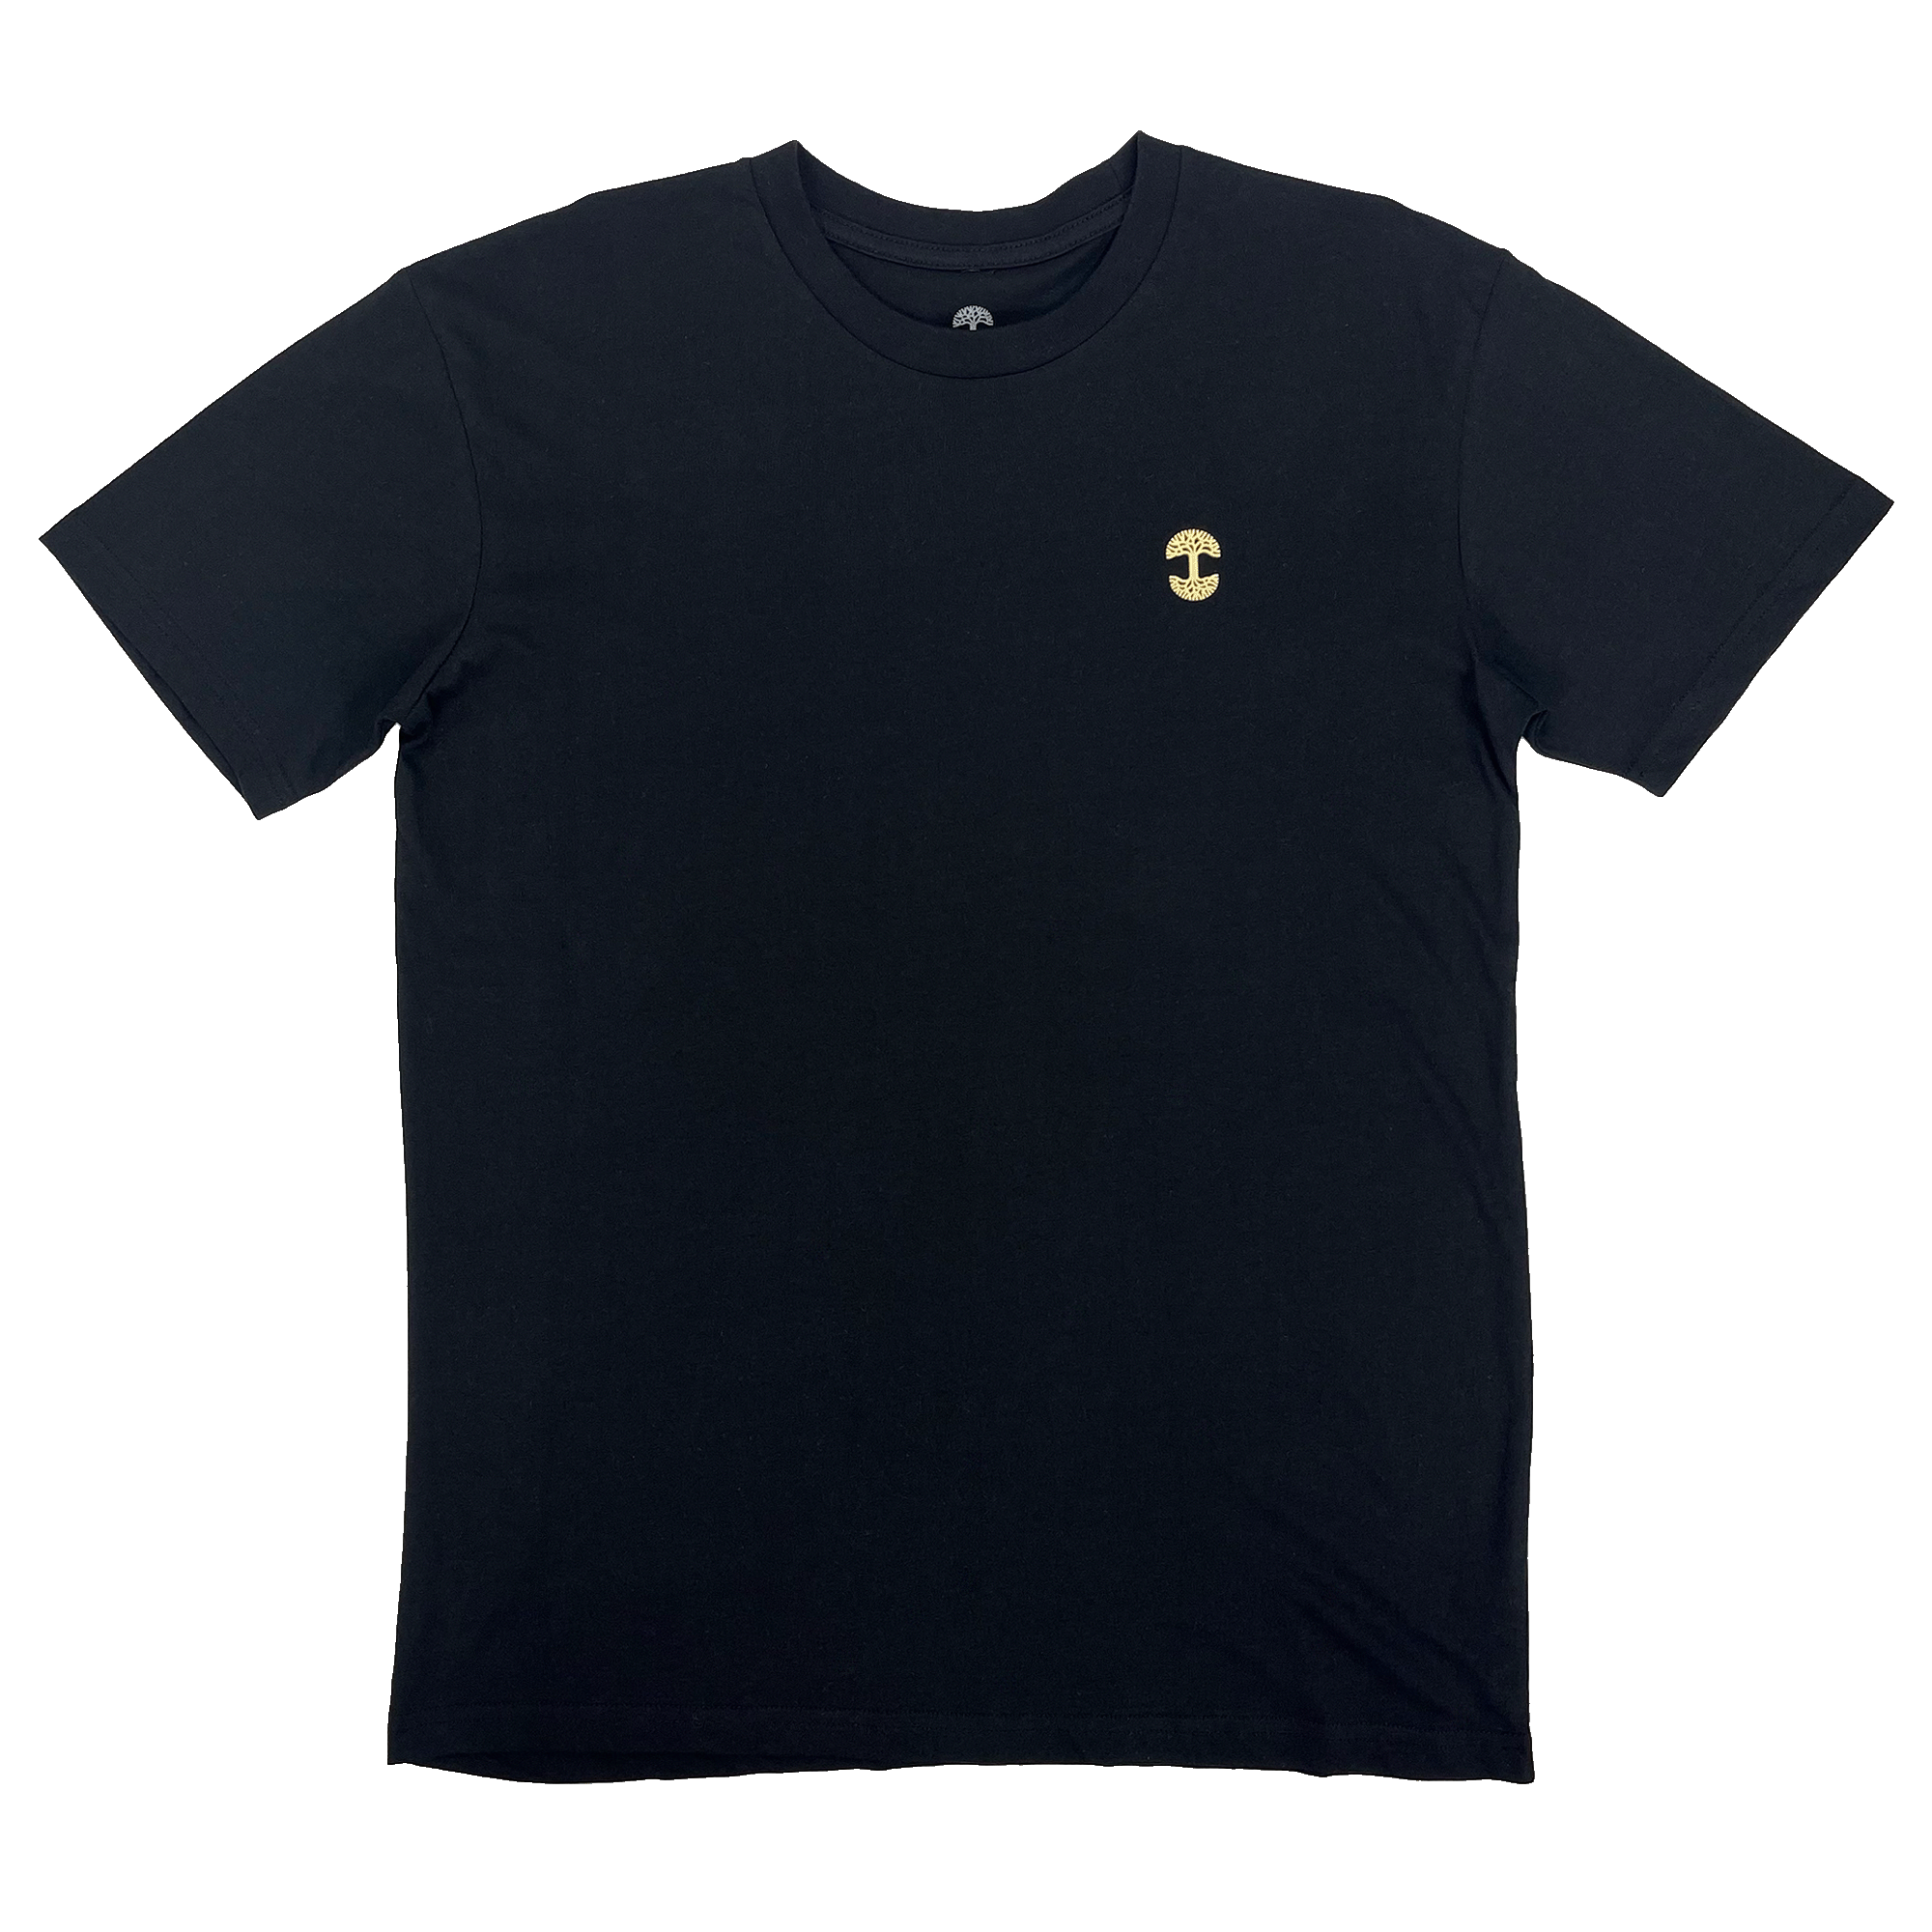 Front view of black t-shirt with yellow Oaklandish tree logo on front chest.